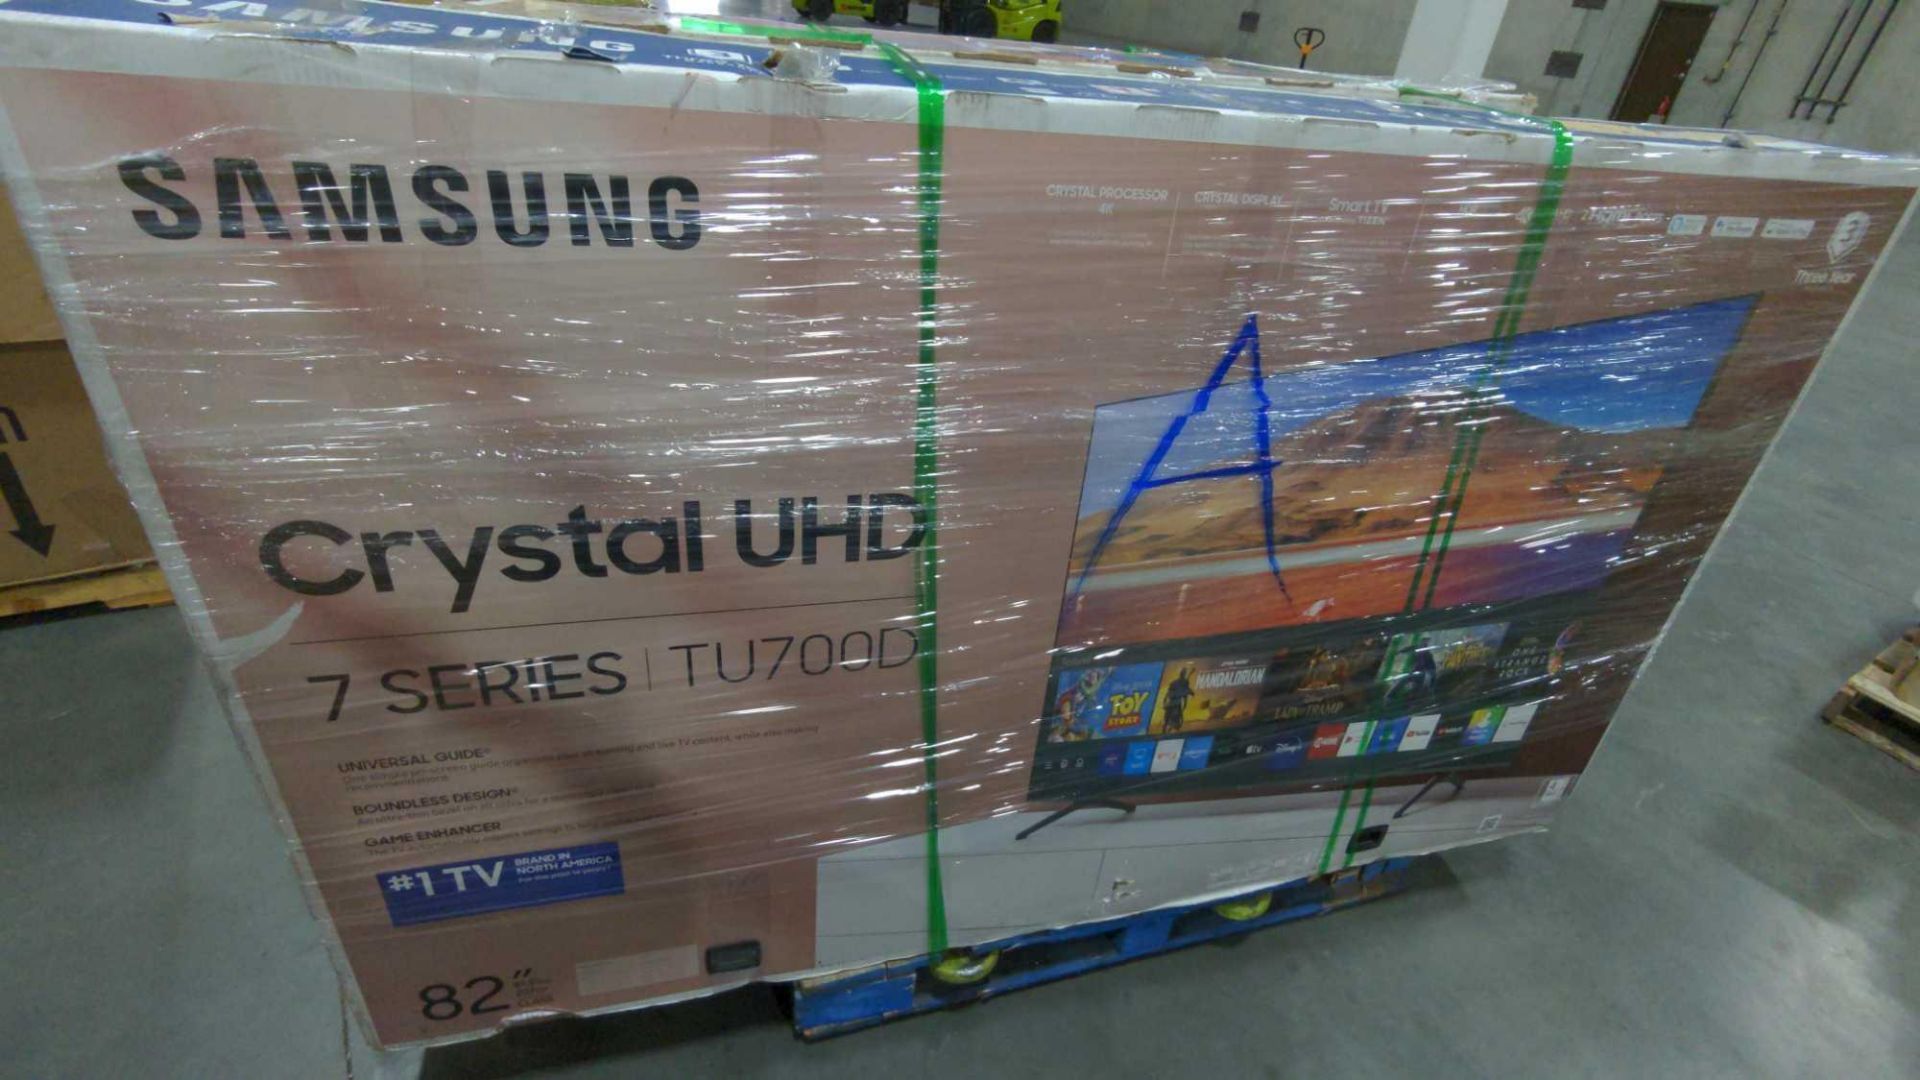 Samsung Crystal UHD 82" TV (grade A tested & working) (grade A tested & working) - Image 2 of 2